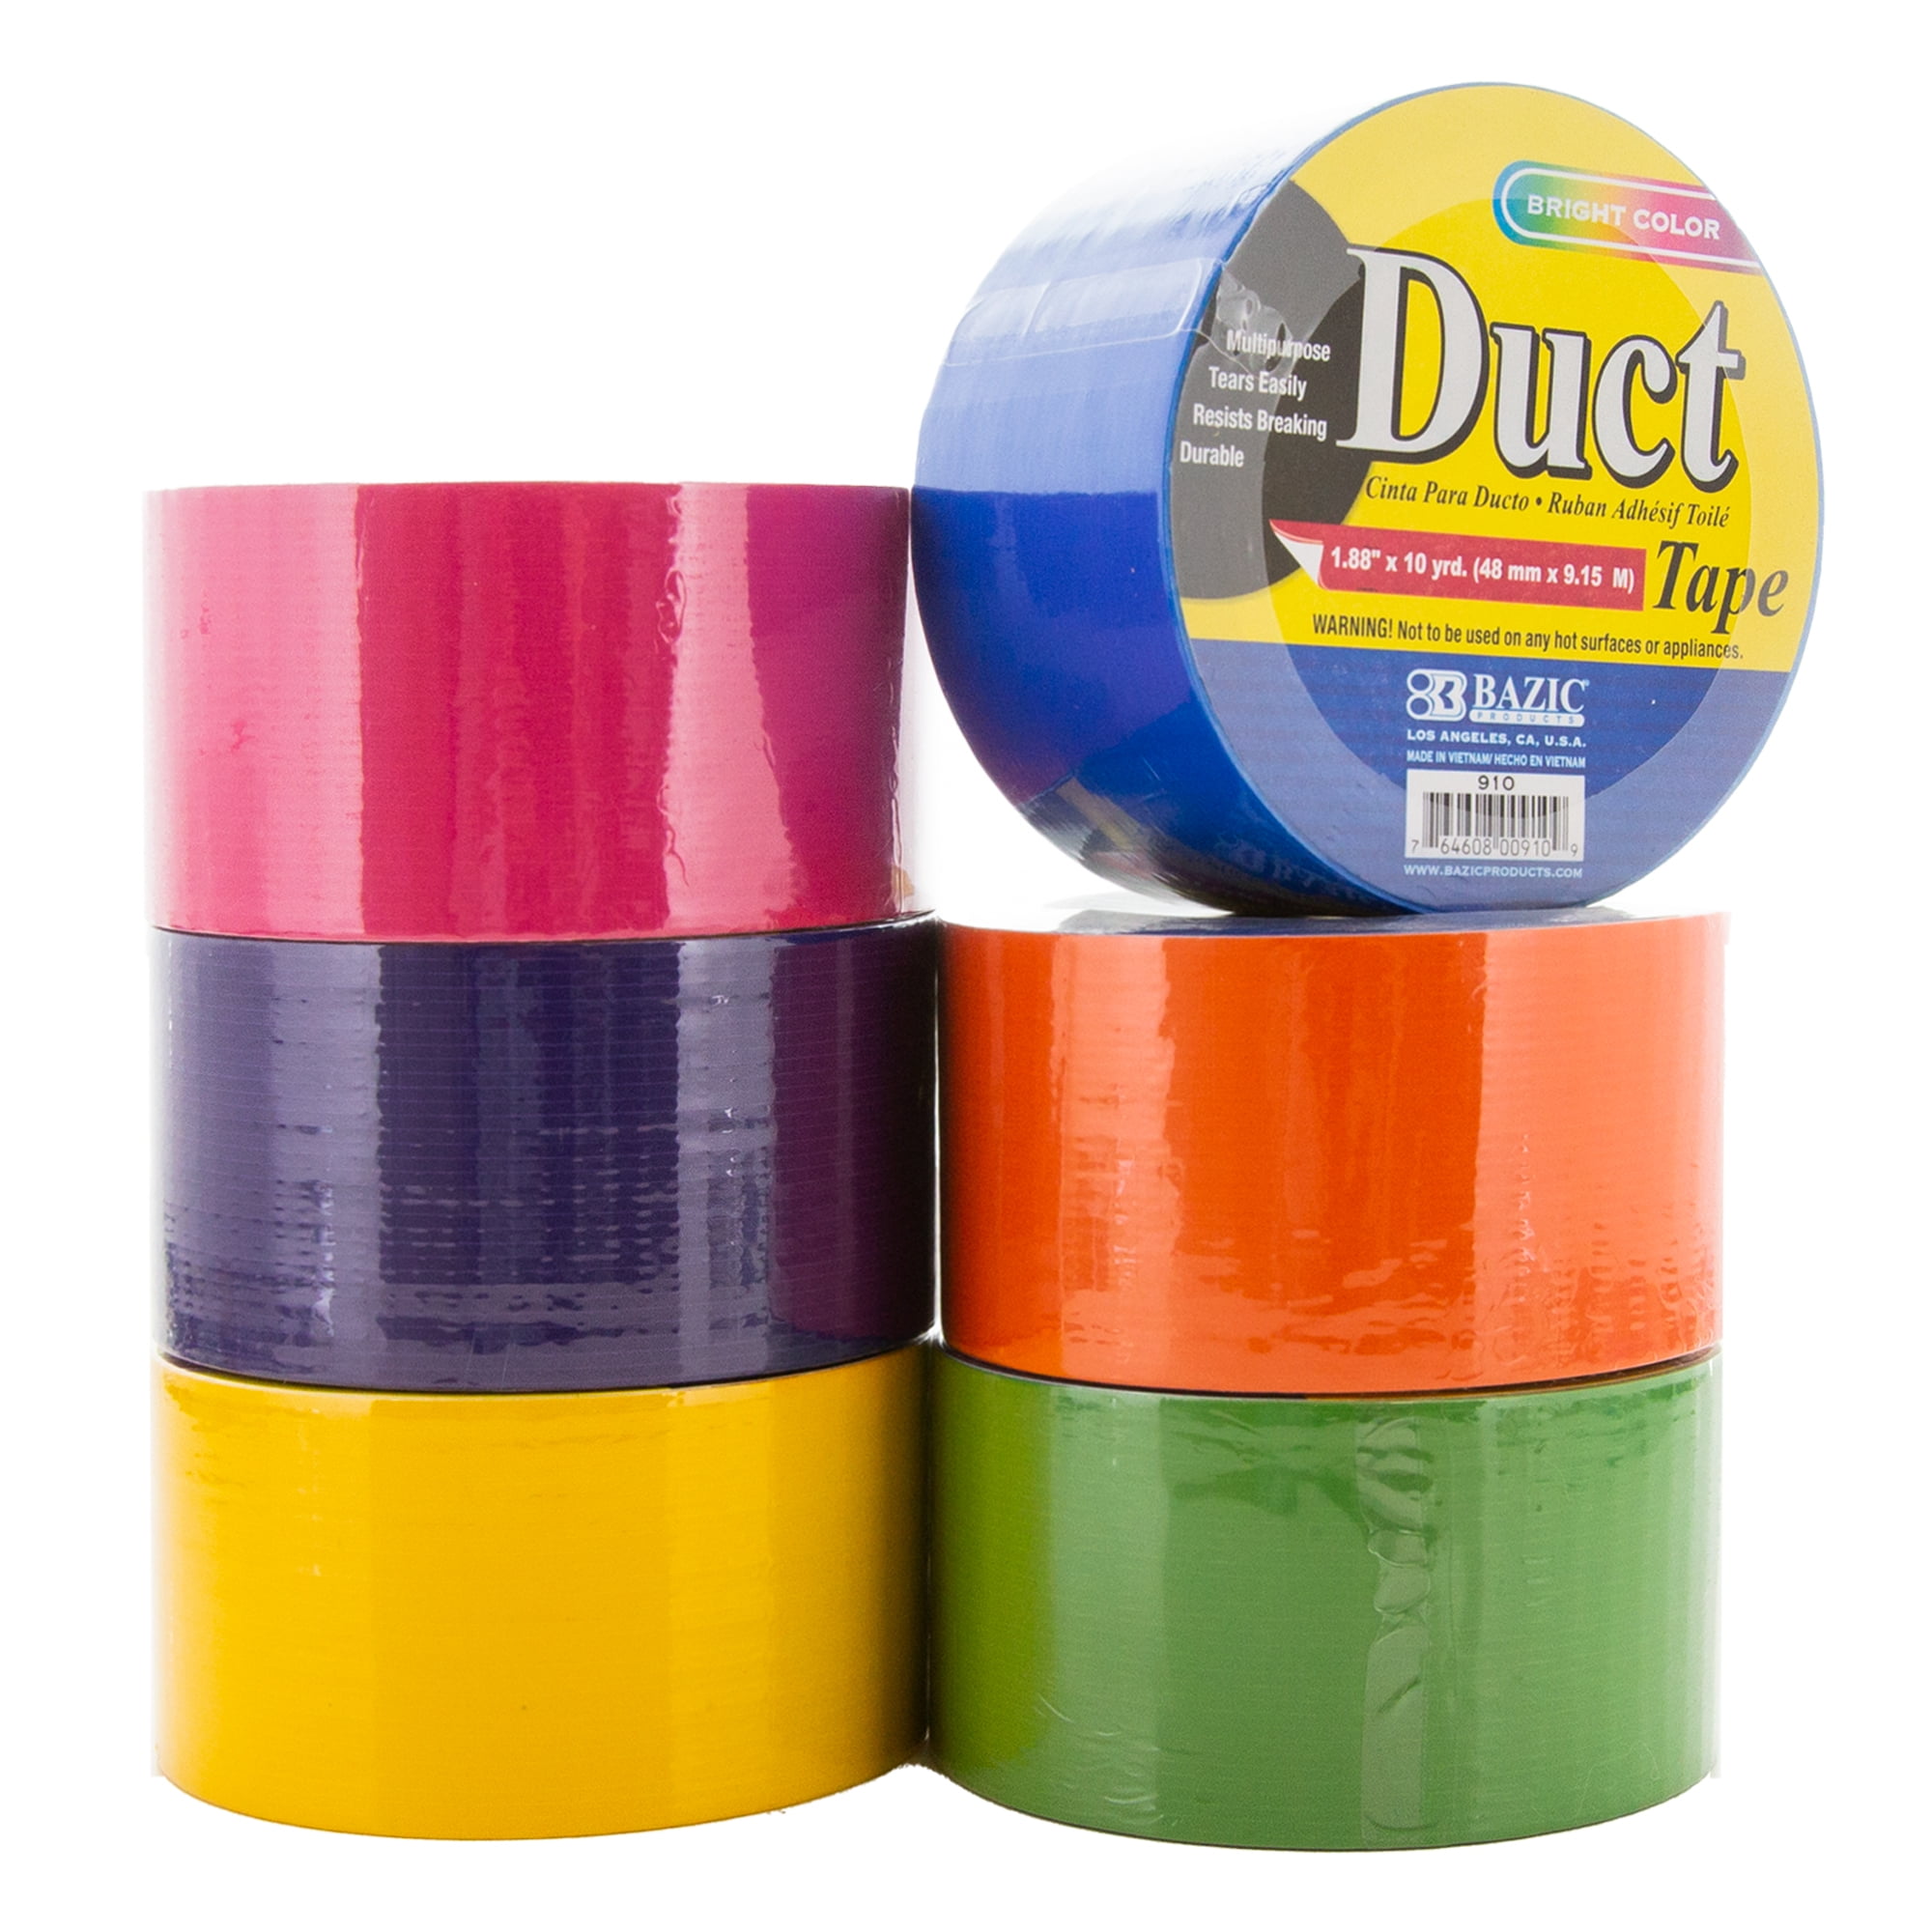 Adhes Duct Tape Sliver Waterproof Tape Ducktape for Home Office Use, 1.88inch,30yard,Pack of 1 Rolls